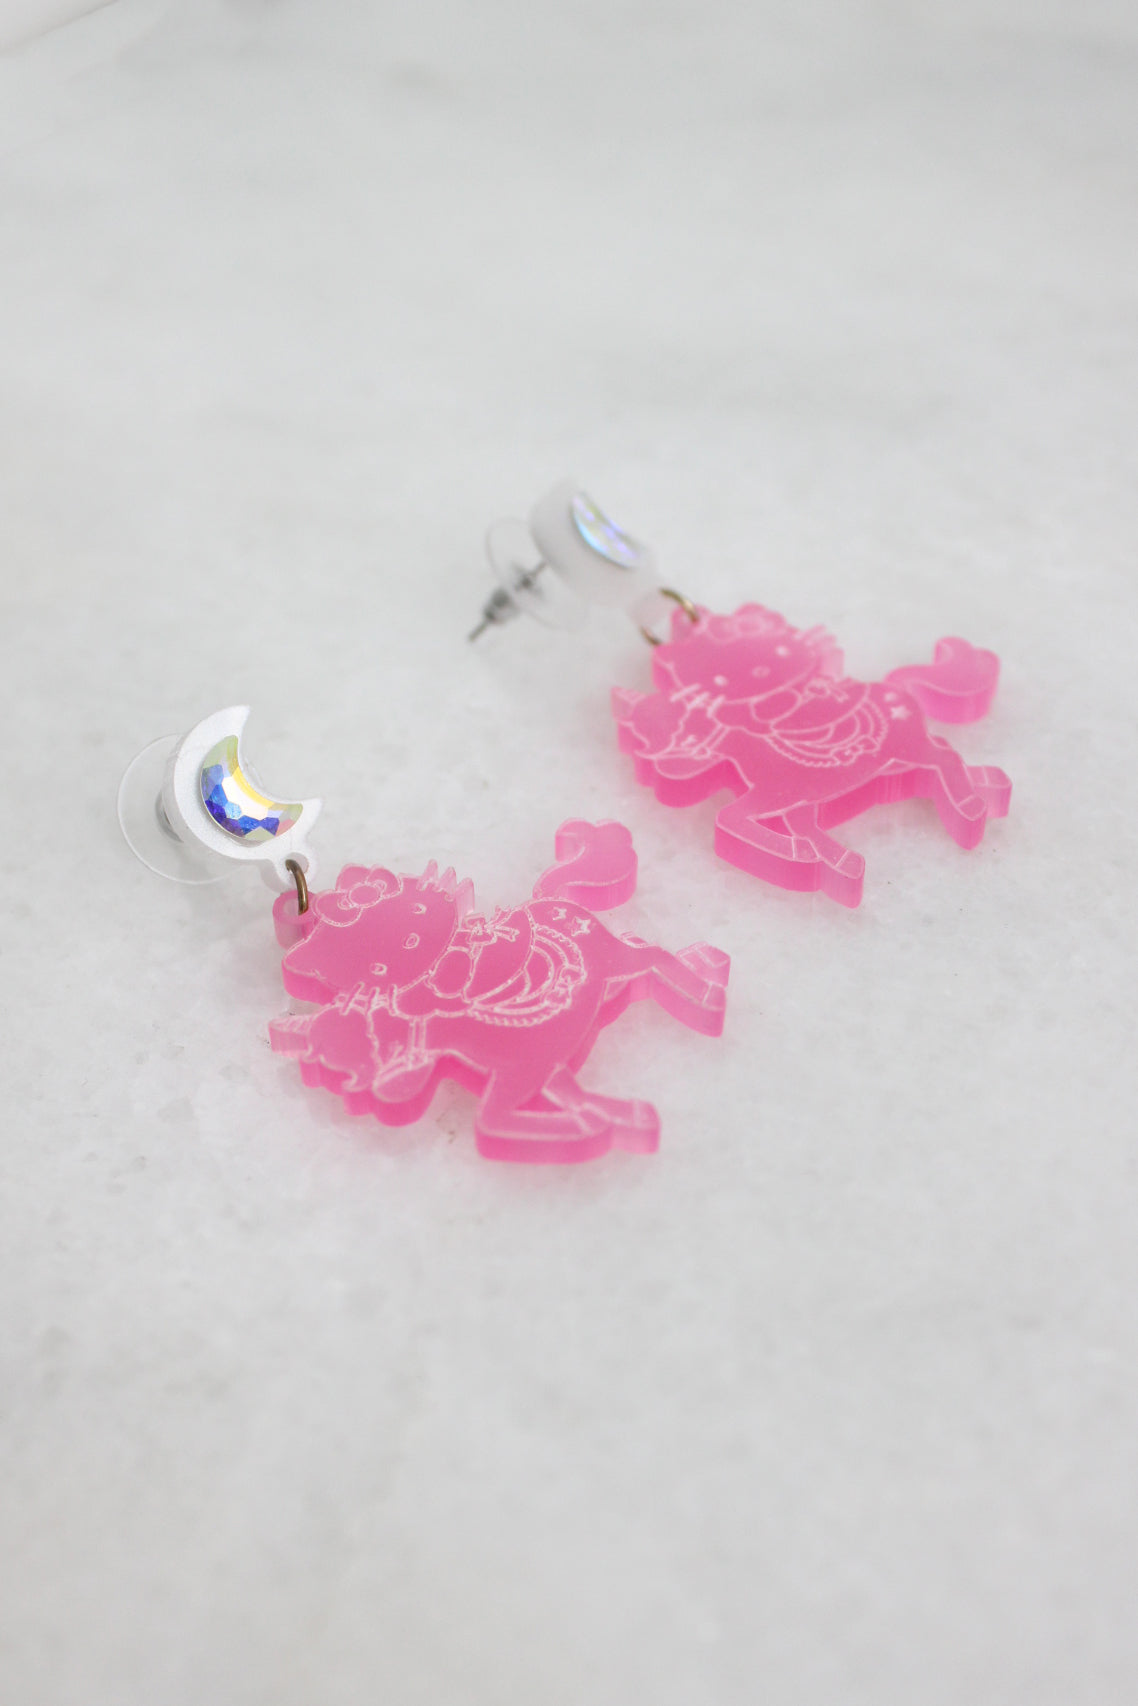 ¾ angled top view of pink earrings with a frost moon-shaped stud adorned with a rainbow effect rhinestone. 